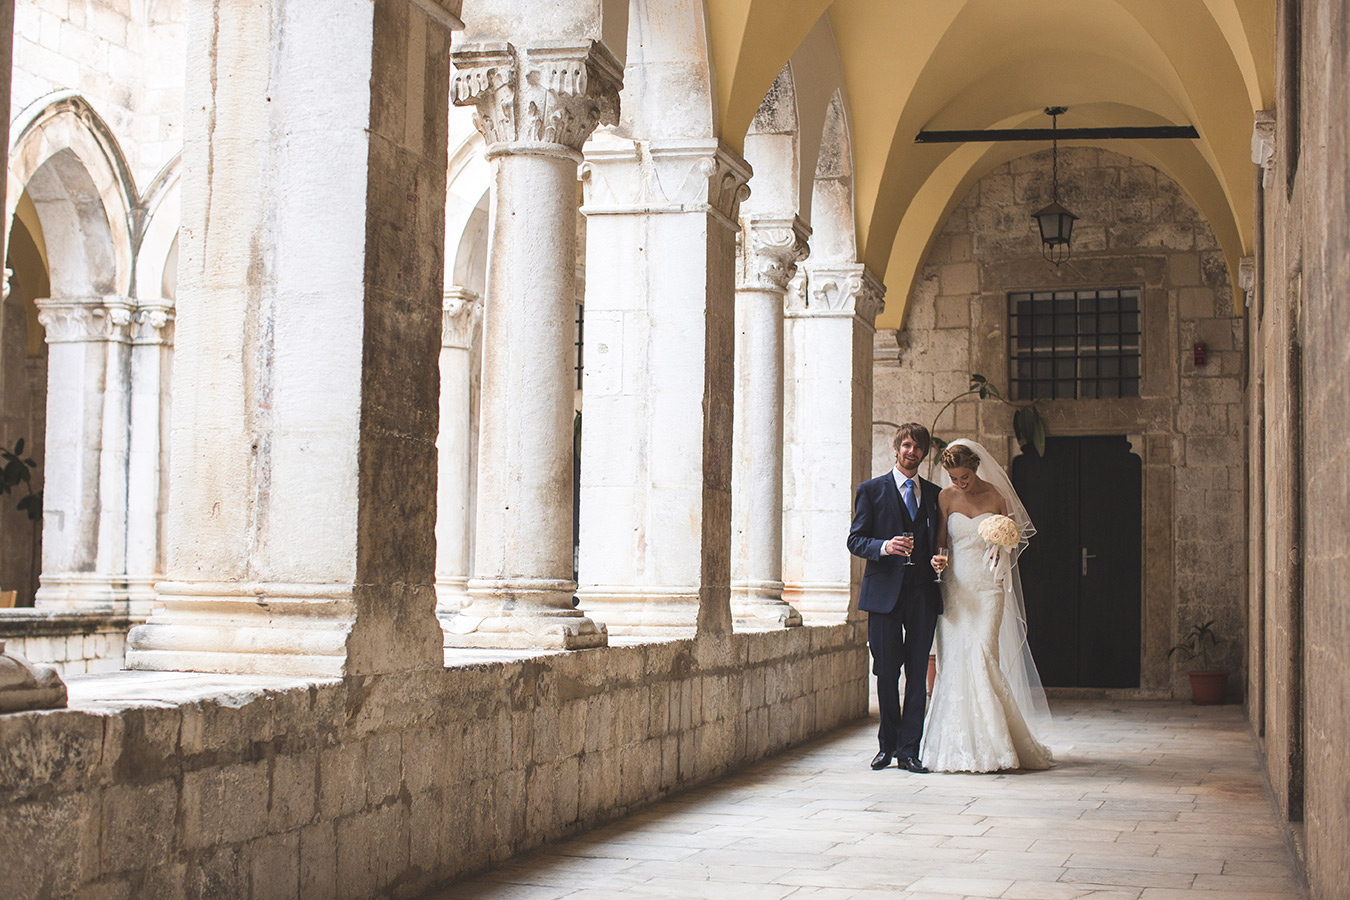 One of a set of images taken at this chic destination Wedding of Jenna & Nick. The stylish old town of Dubrovnik, Croatia.  The couple walk hand in hand.  photography by Matt Porteous